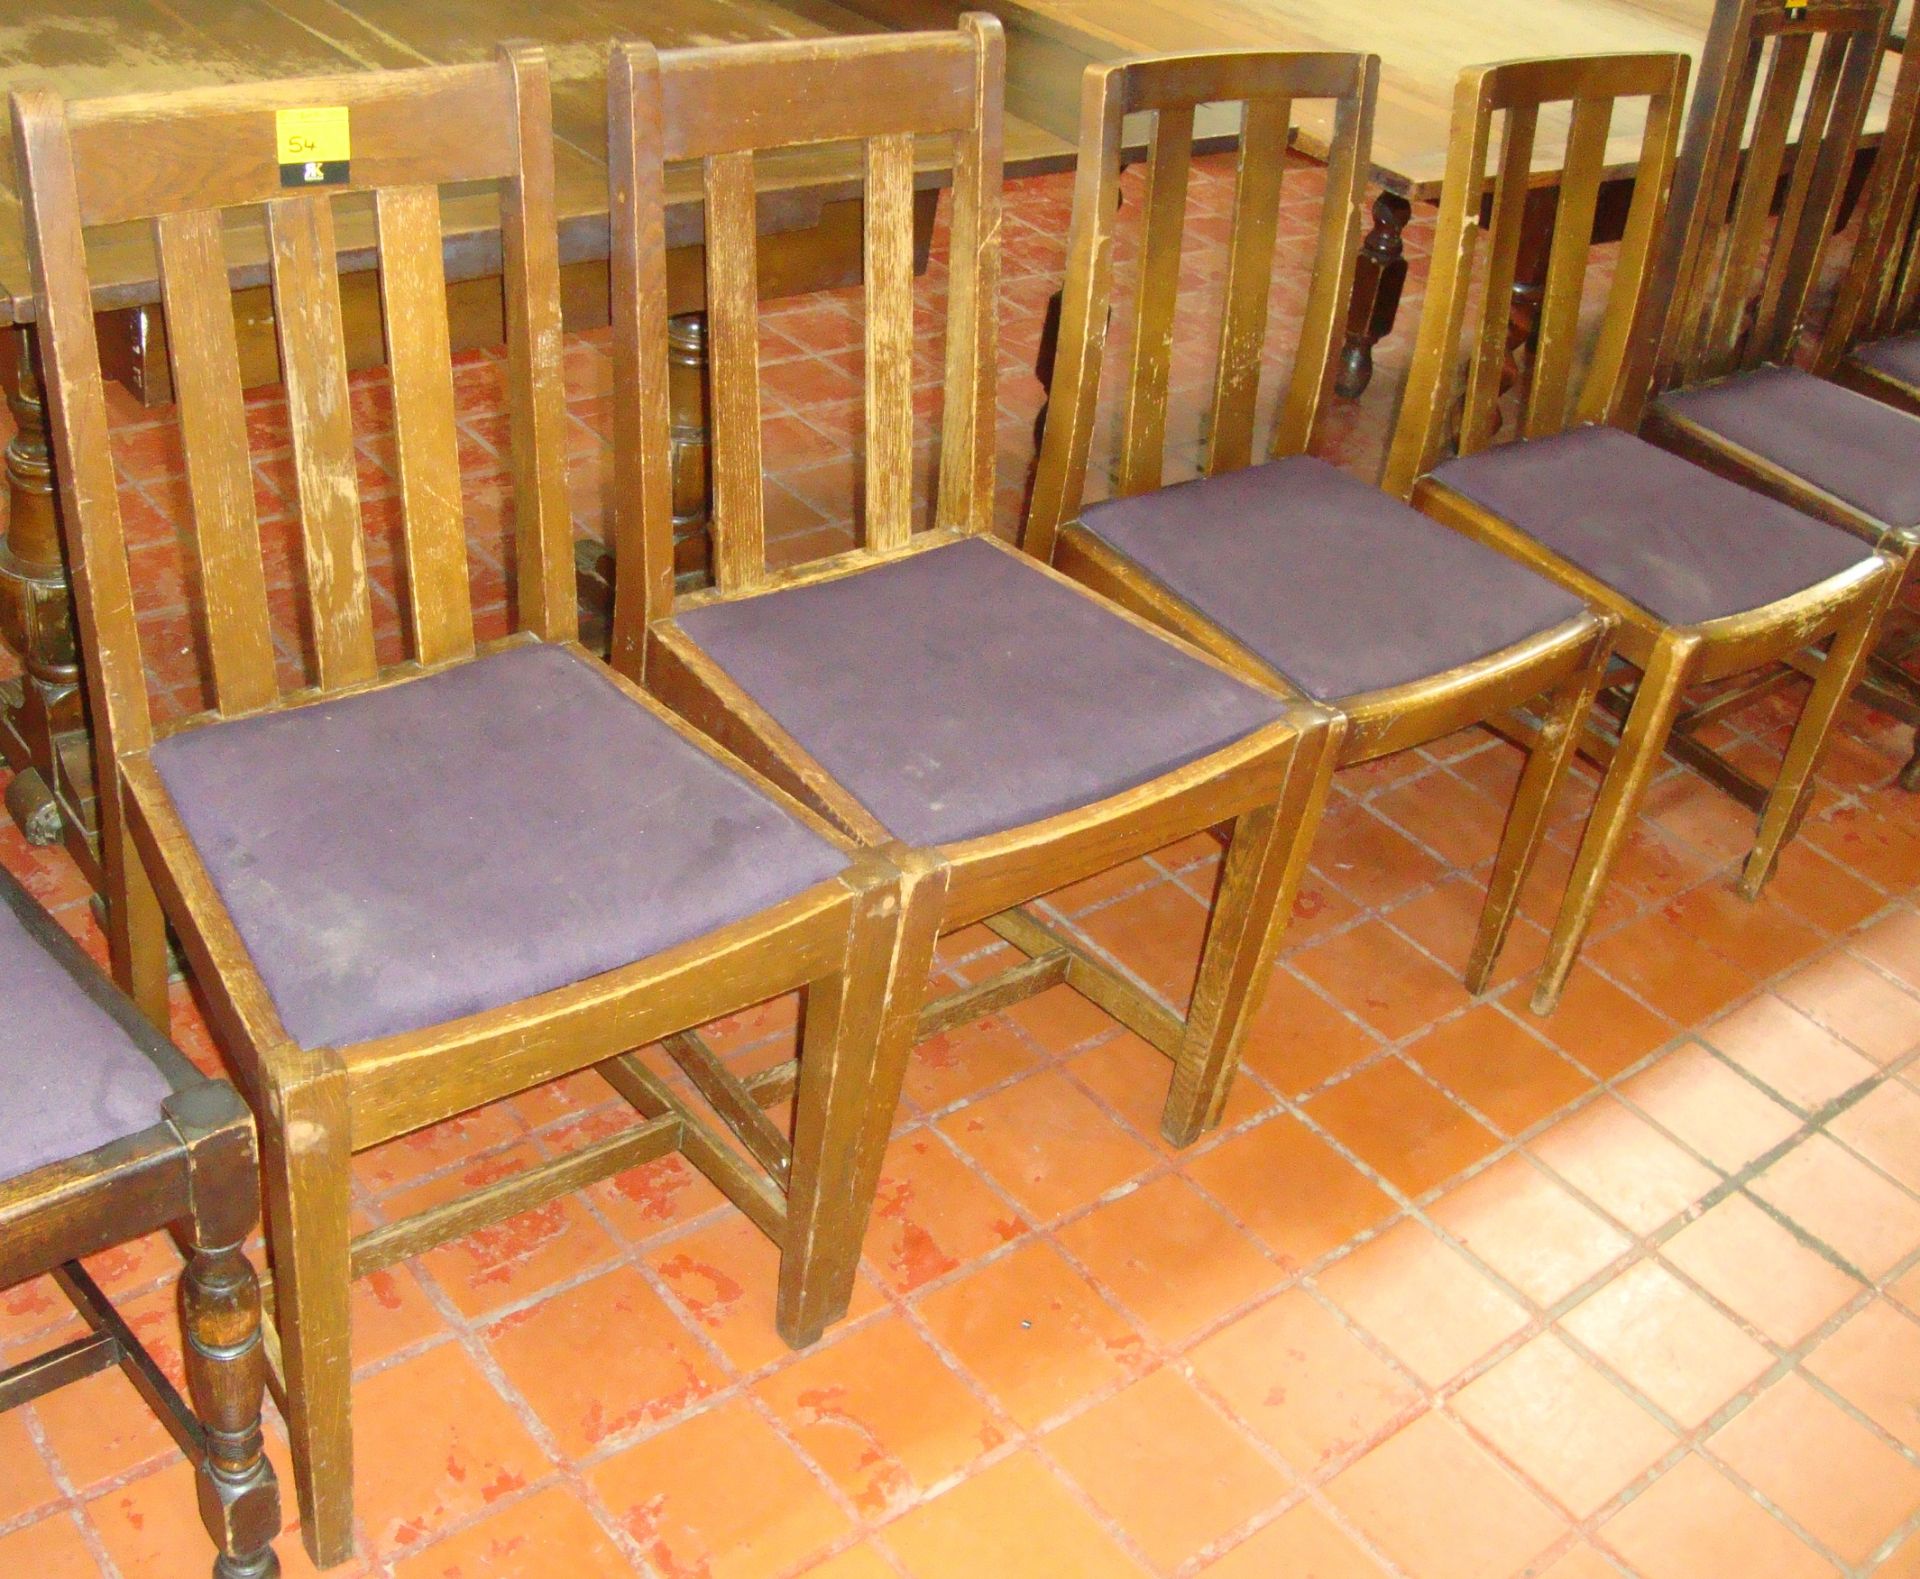 4 off wooden chairs with purple upholstered seat bases. NB each chair is slightly different